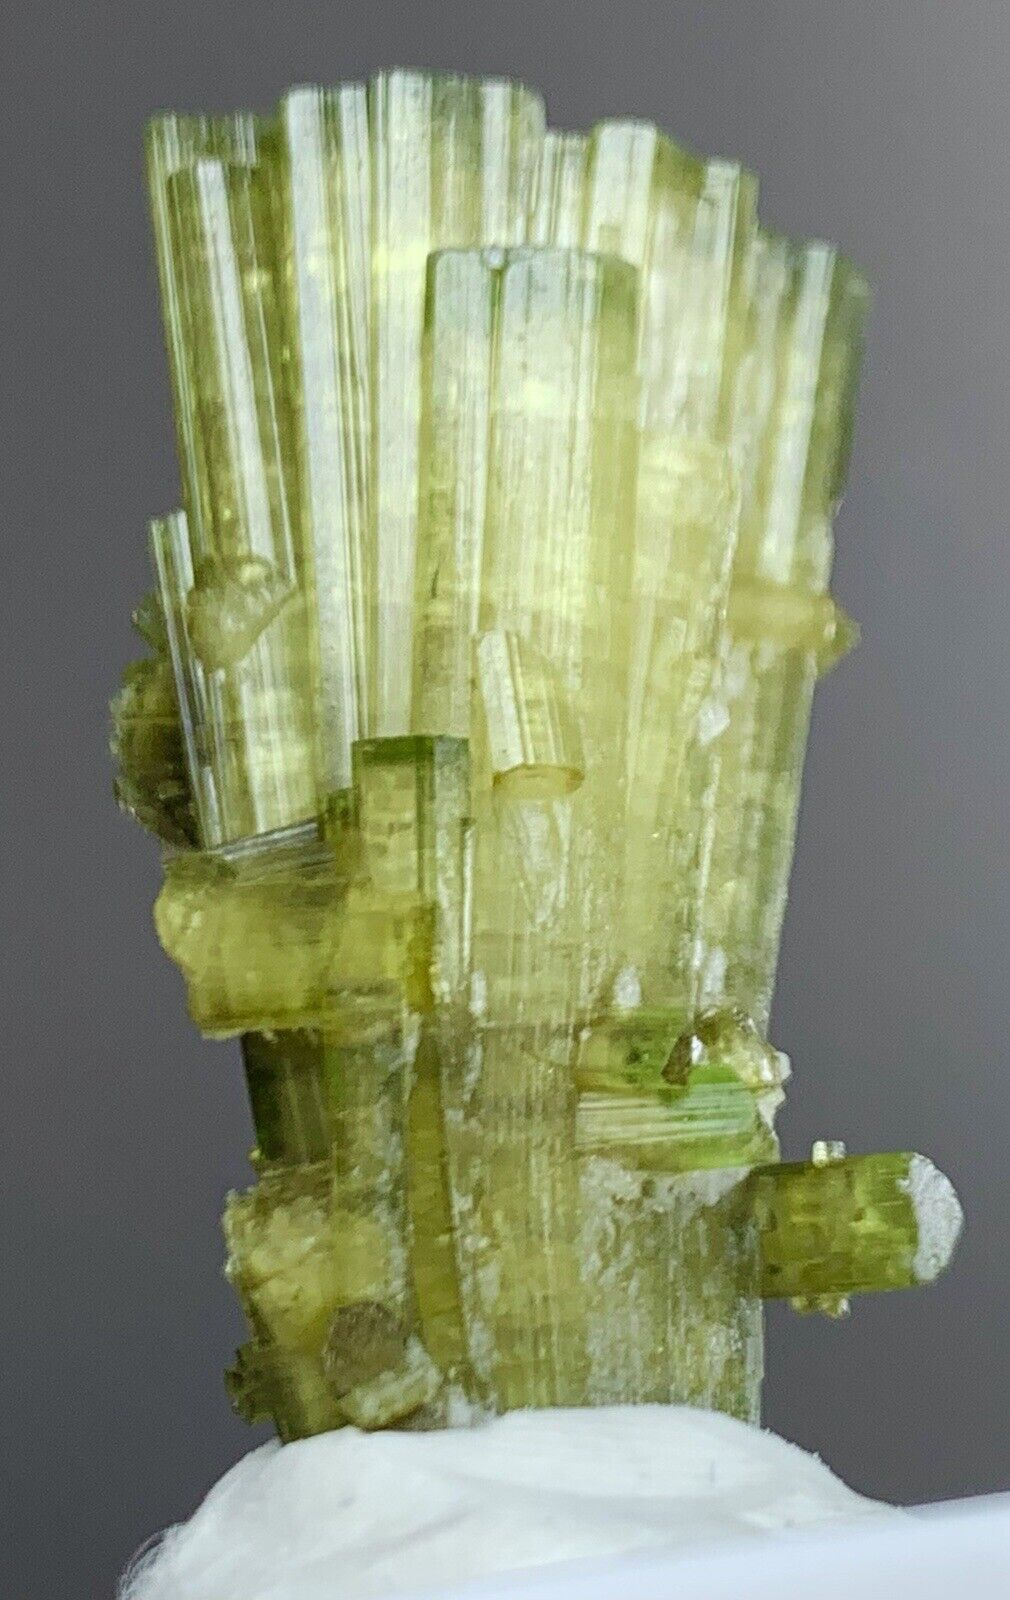 69 Carats Very Nice DT Green color tourmaline Crystals Bunch Specimen